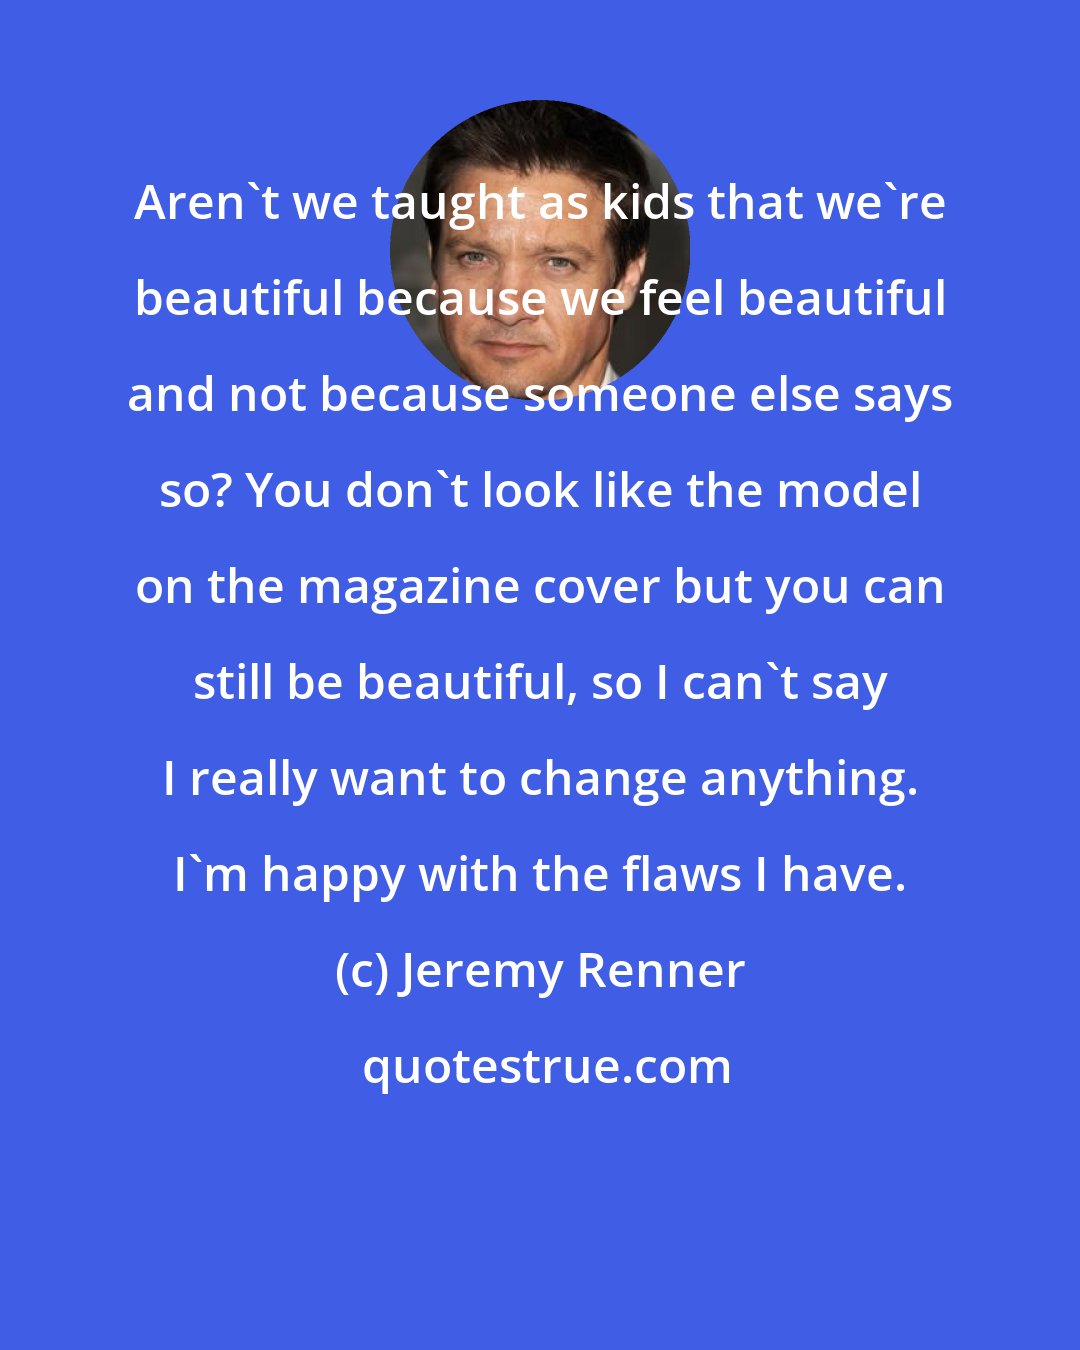 Jeremy Renner: Aren't we taught as kids that we're beautiful because we feel beautiful and not because someone else says so? You don't look like the model on the magazine cover but you can still be beautiful, so I can't say I really want to change anything. I'm happy with the flaws I have.